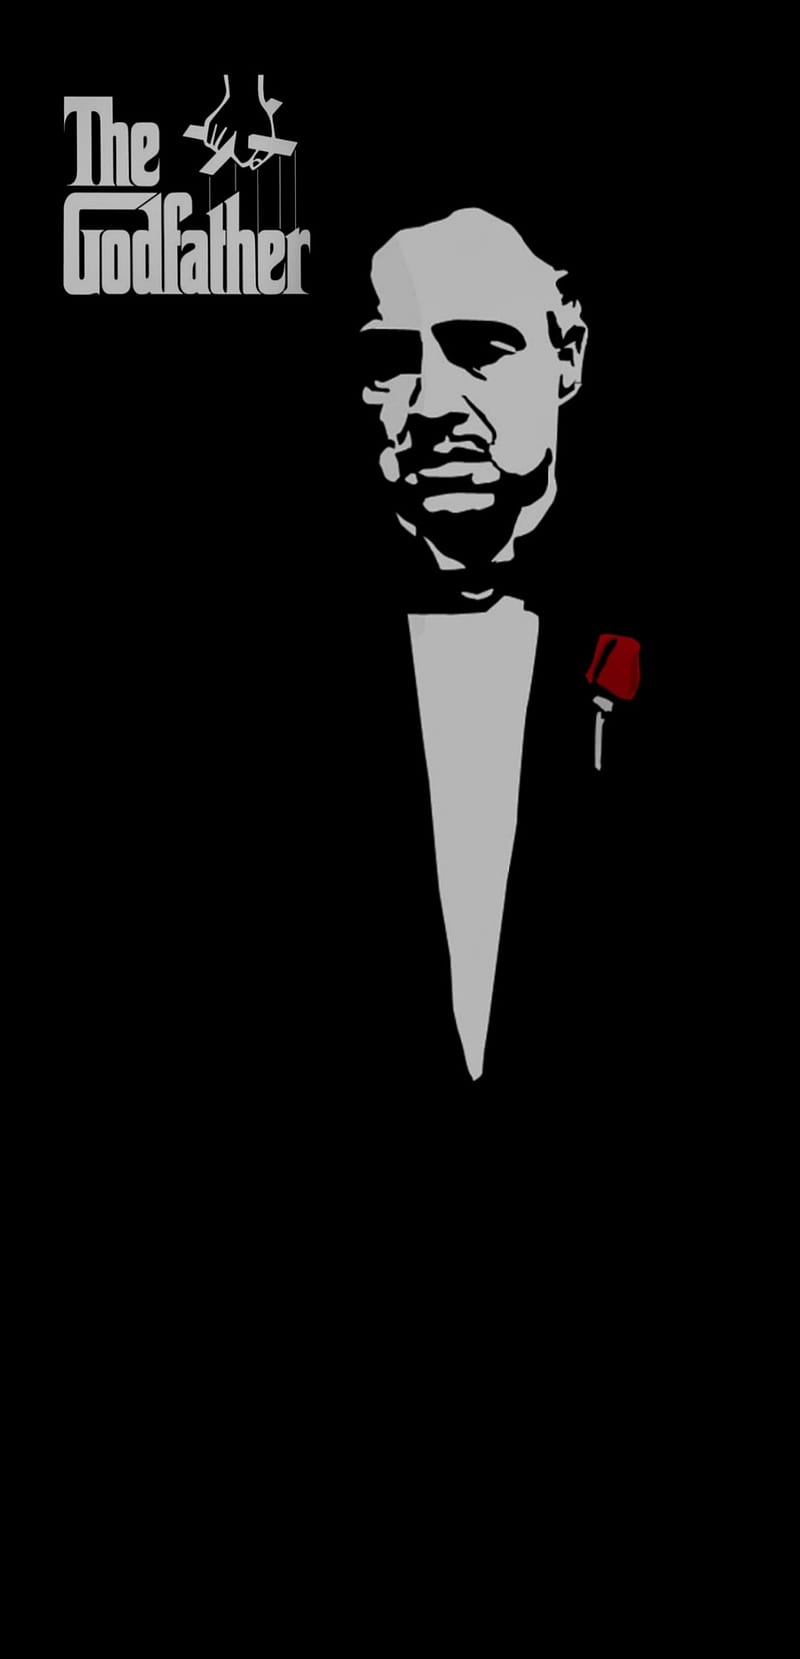 Best The godfather iPhone HD Wallpapers - iLikeWallpaper